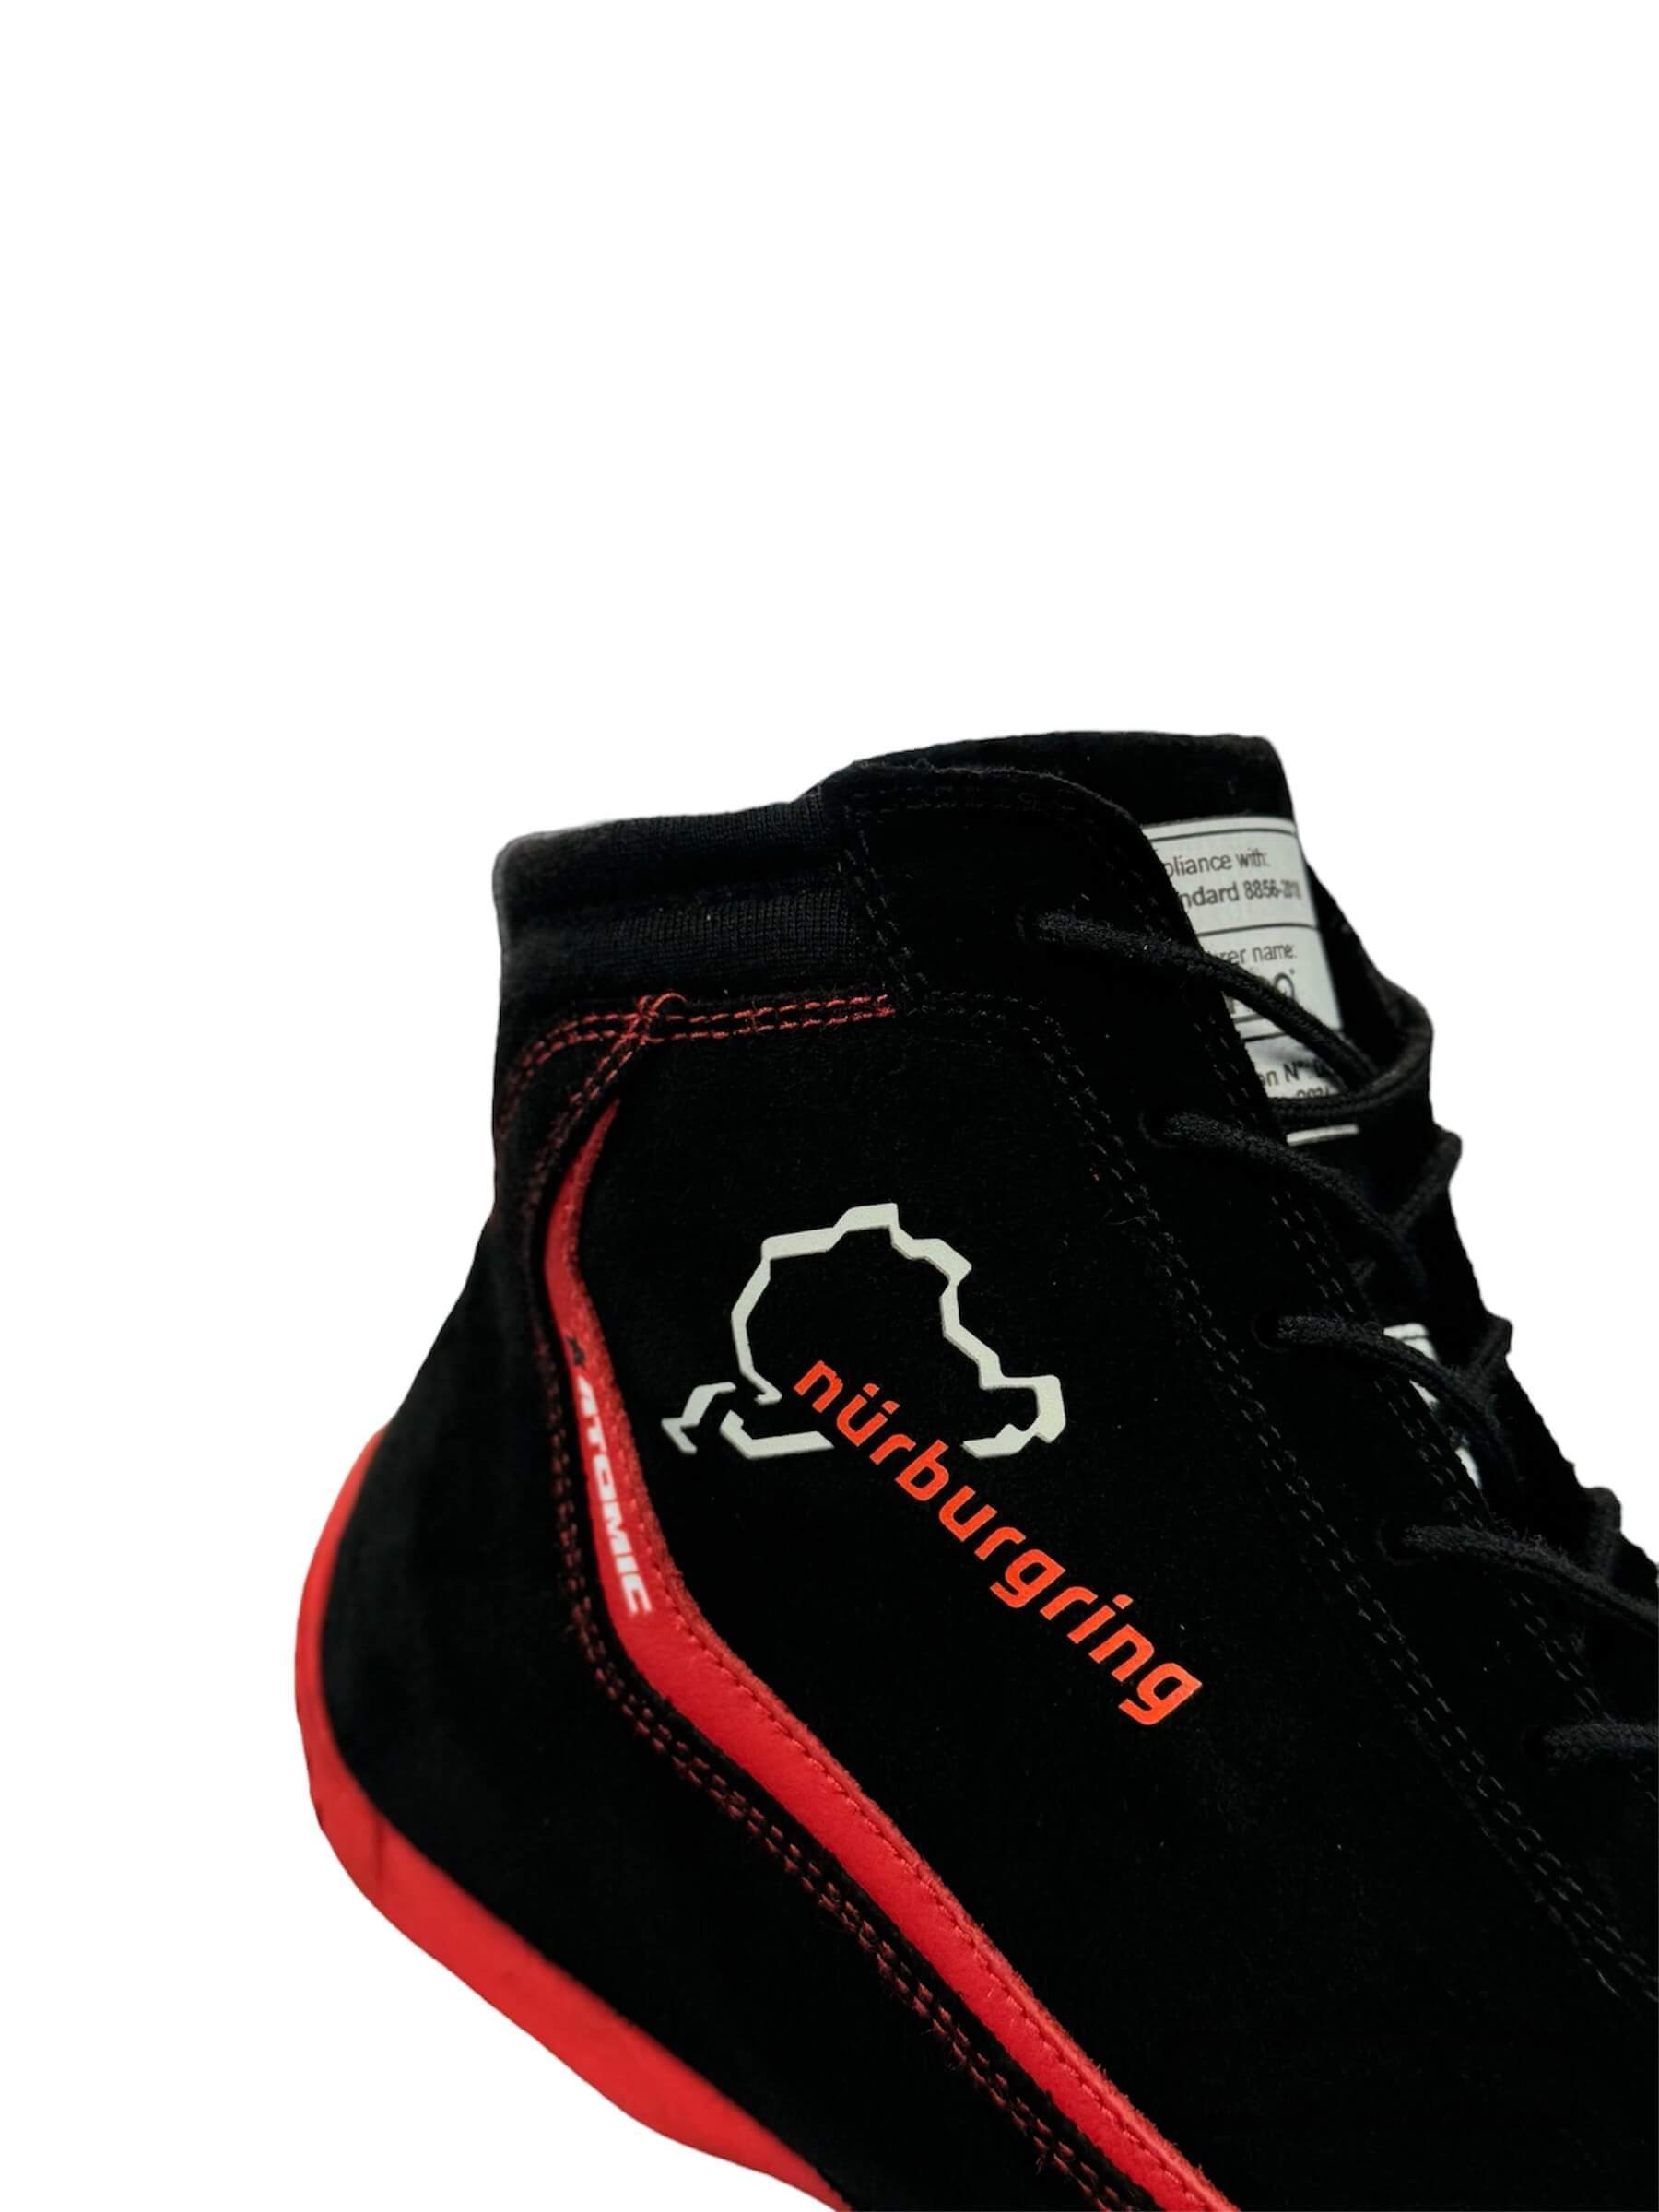 SPARCO 001295SP_NBR40 Shoes Slalom Nurburgring Edition black/red Size 40 Photo-4 